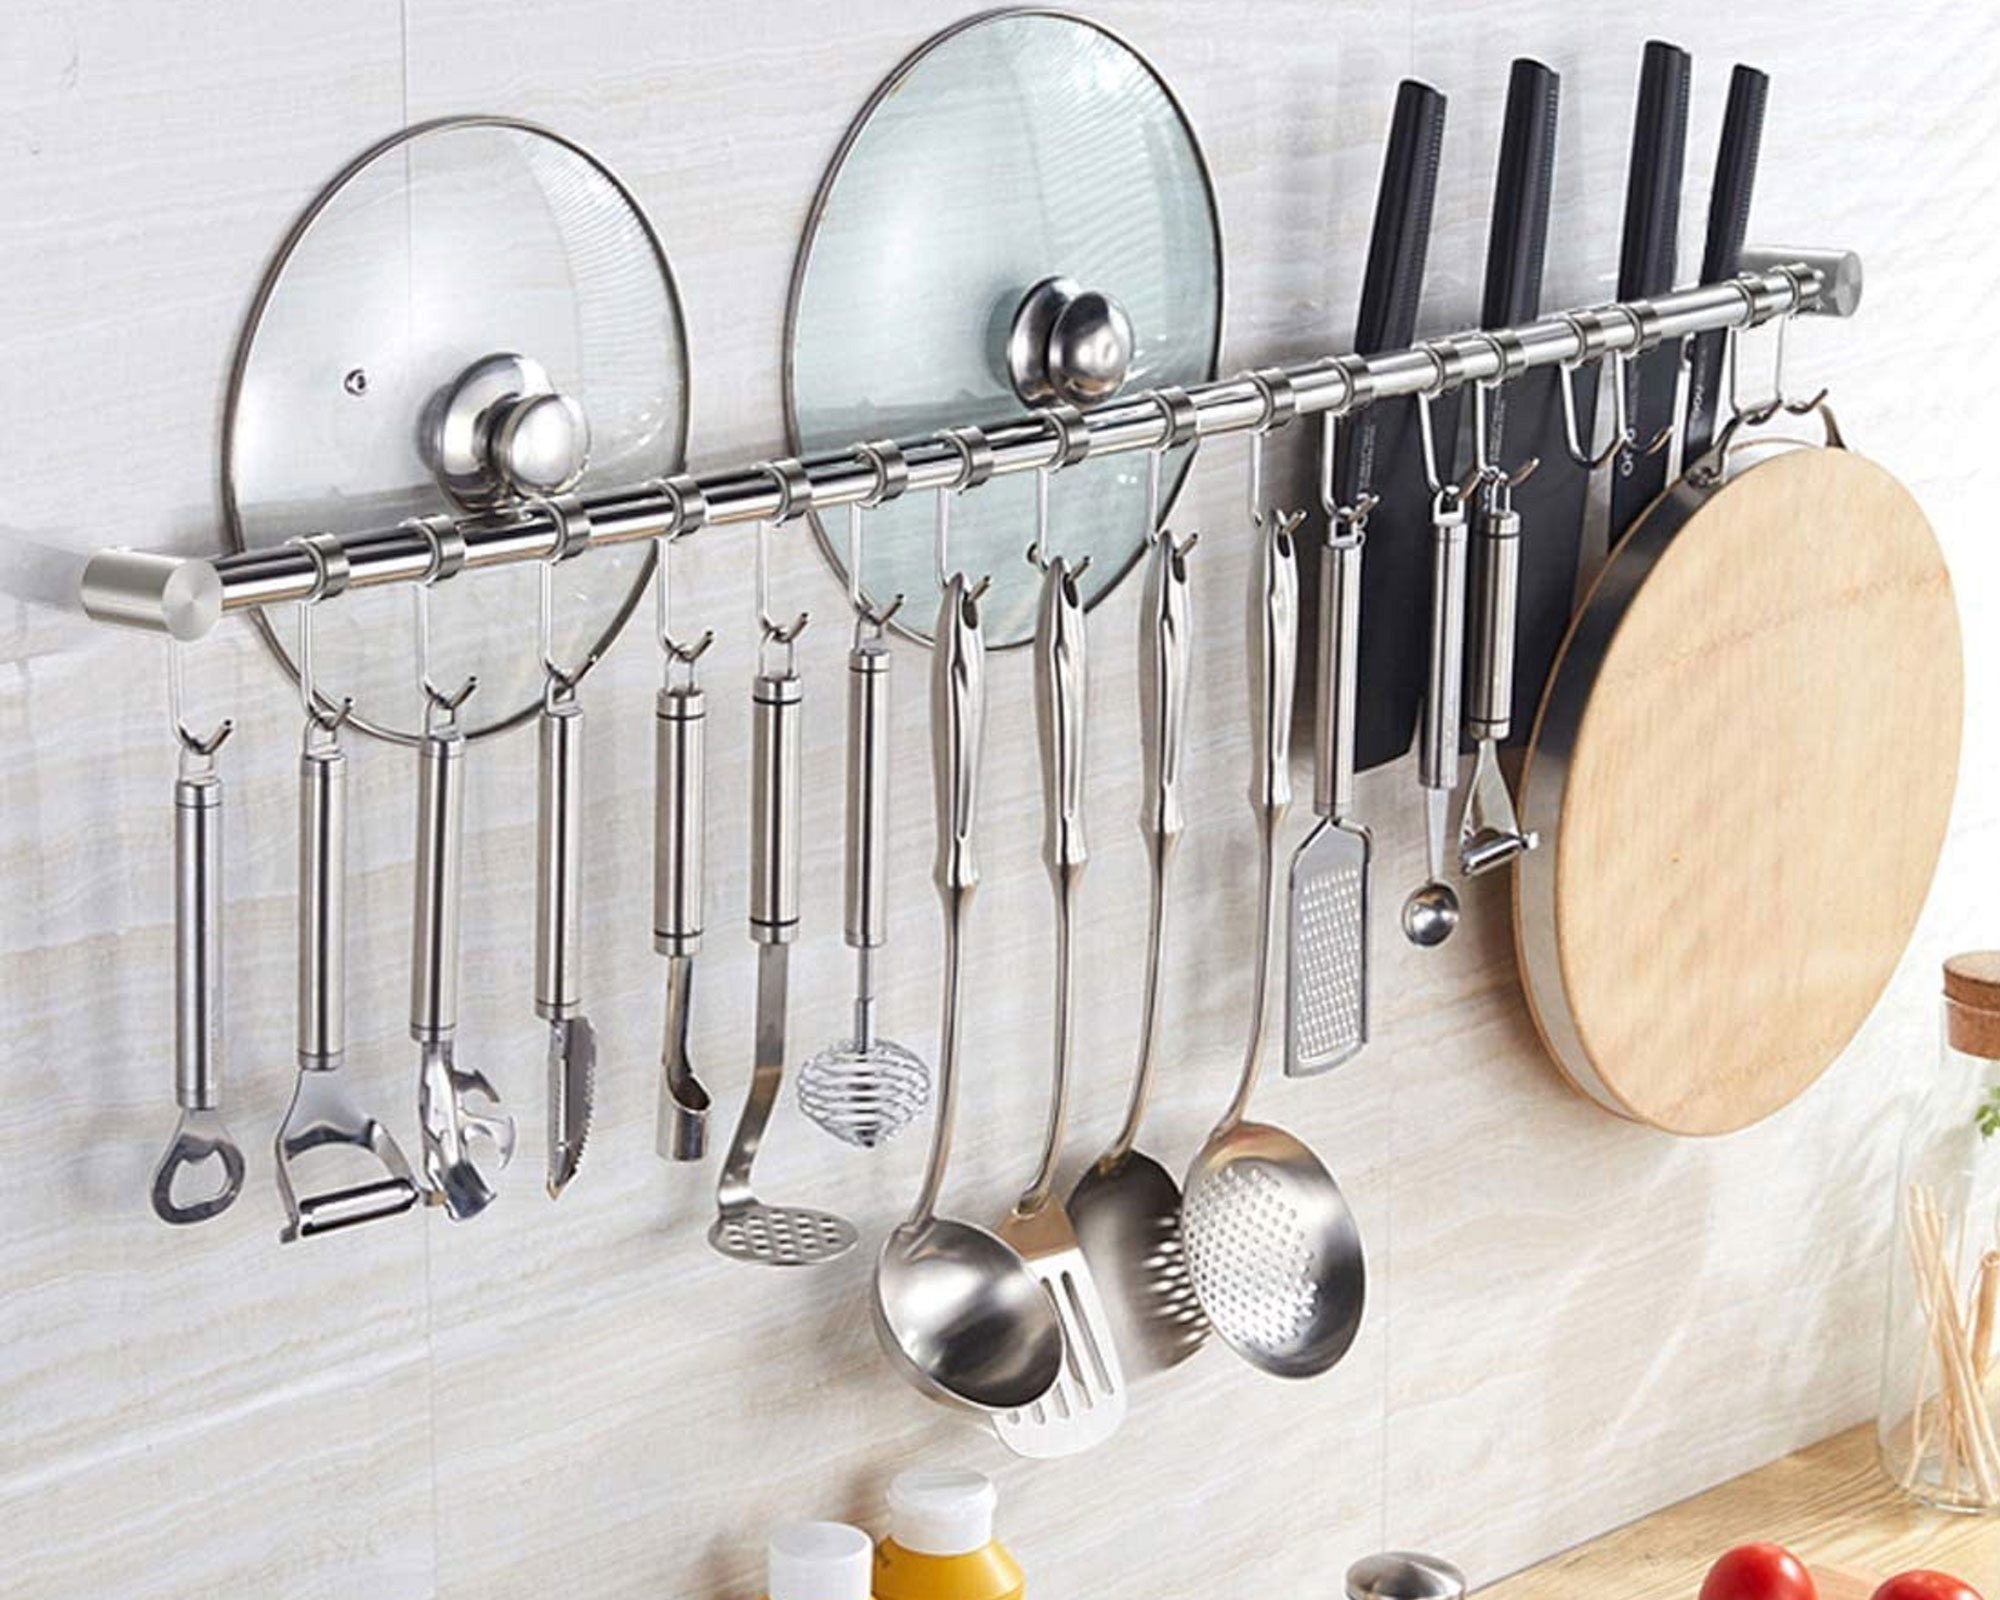 Any ideas about how to store and organize cooking utensils in a